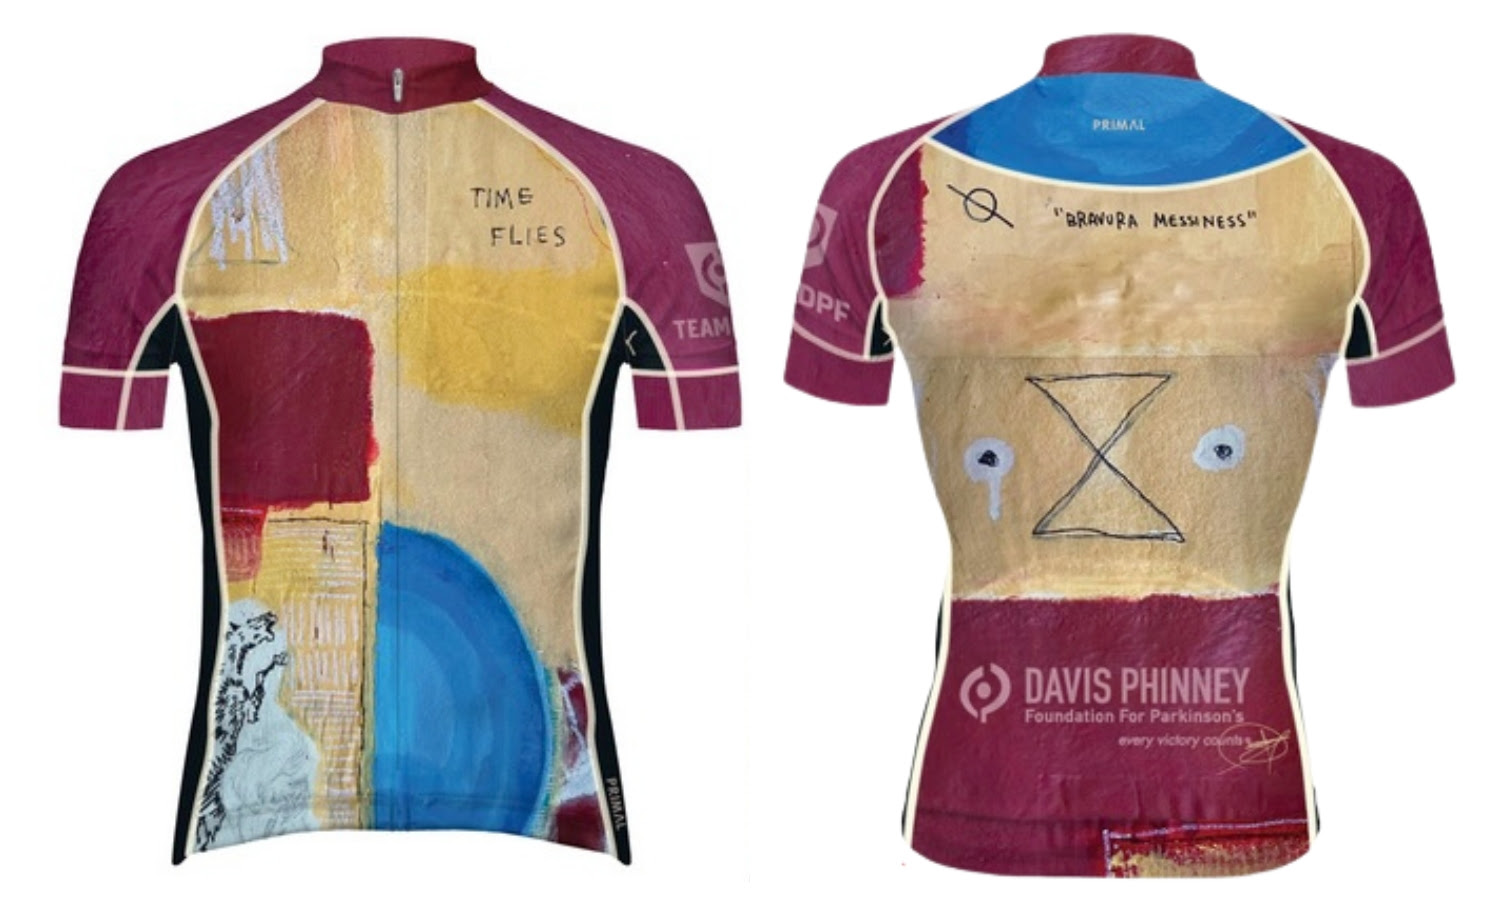 Taylor Phinney designed jersey image 